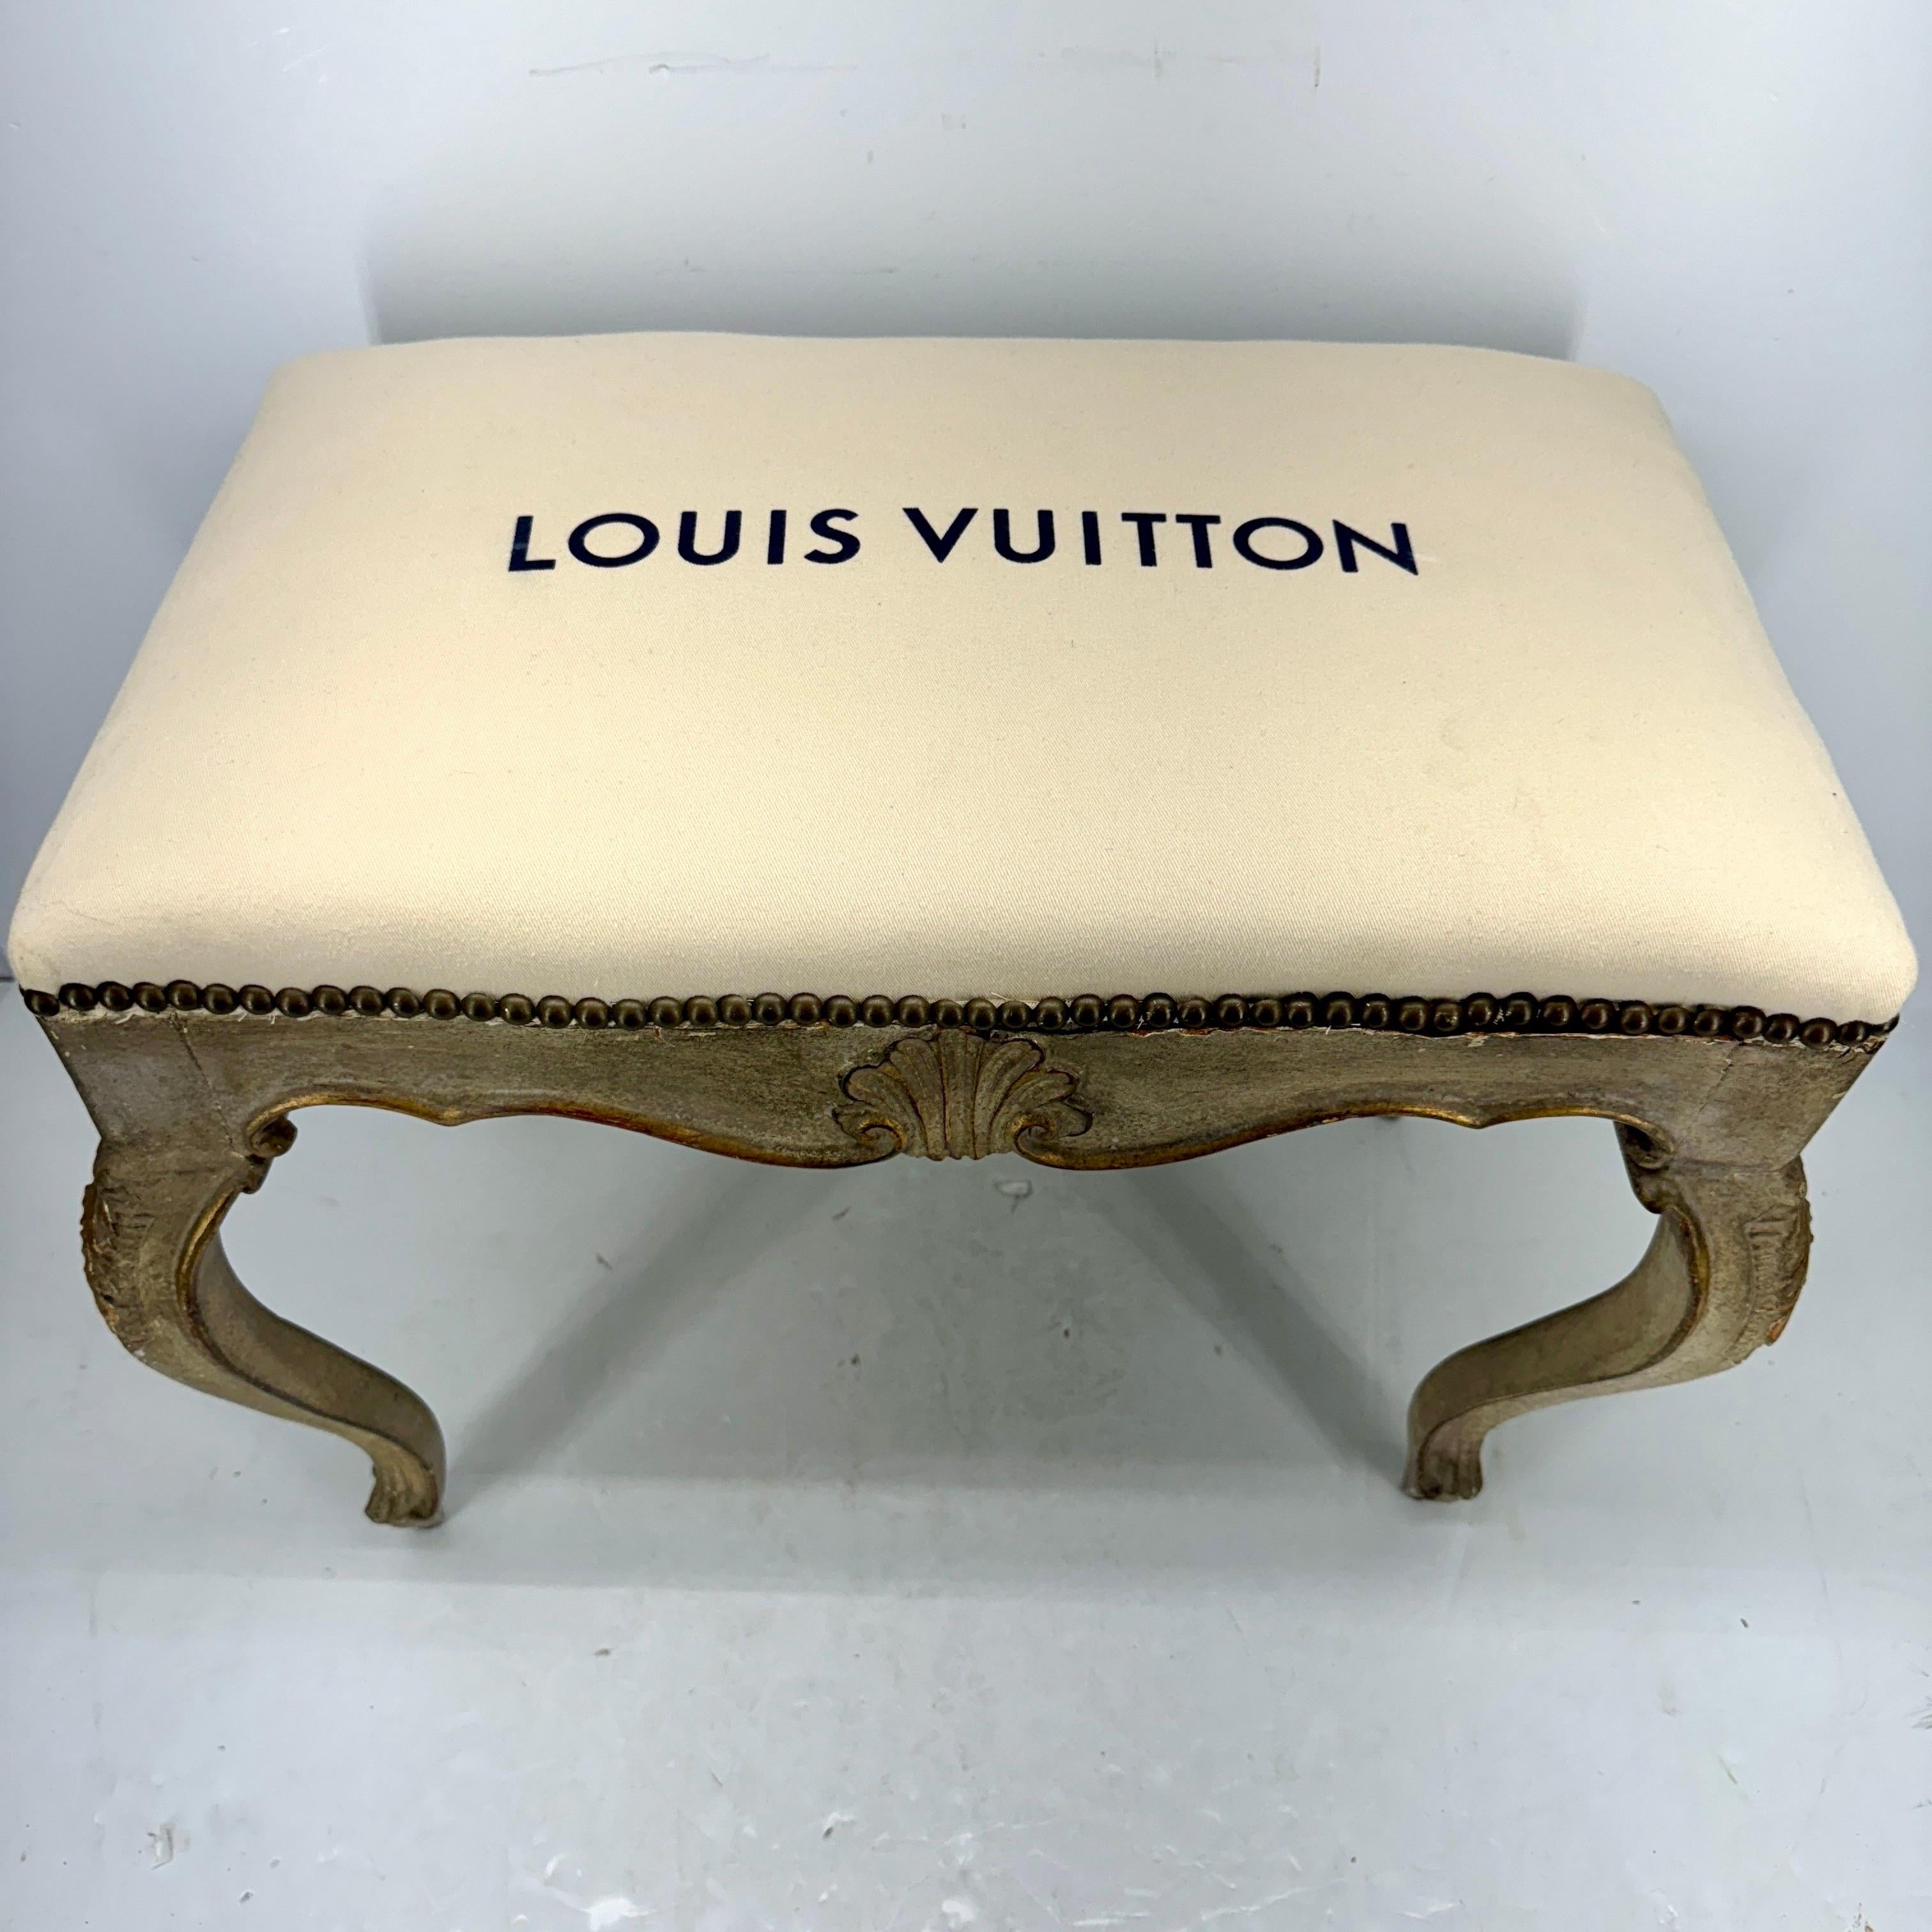 French Rococo Style Louis Vuitton Upholstered Bench with Rocaille In Good Condition For Sale In Haddonfield, NJ